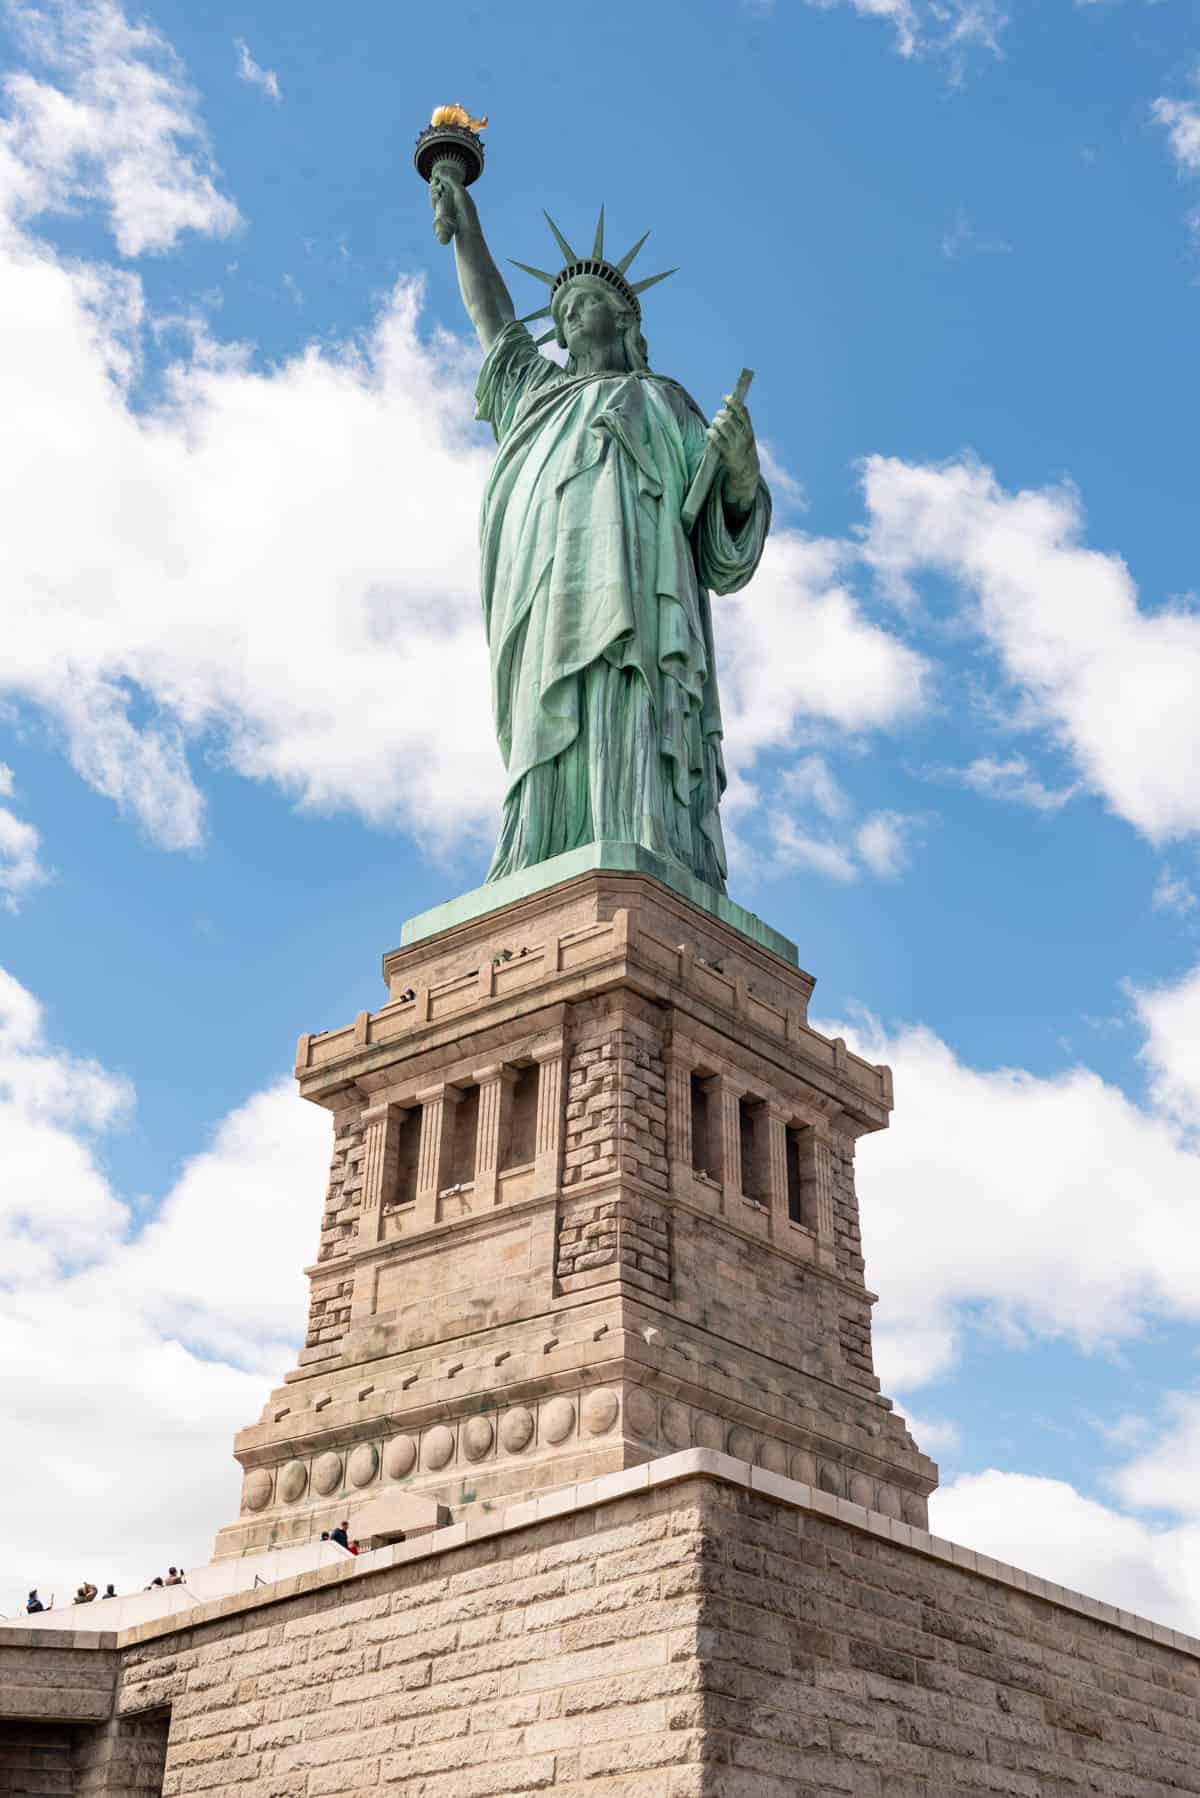 An image of the Statue of Liberty on its pedastal.